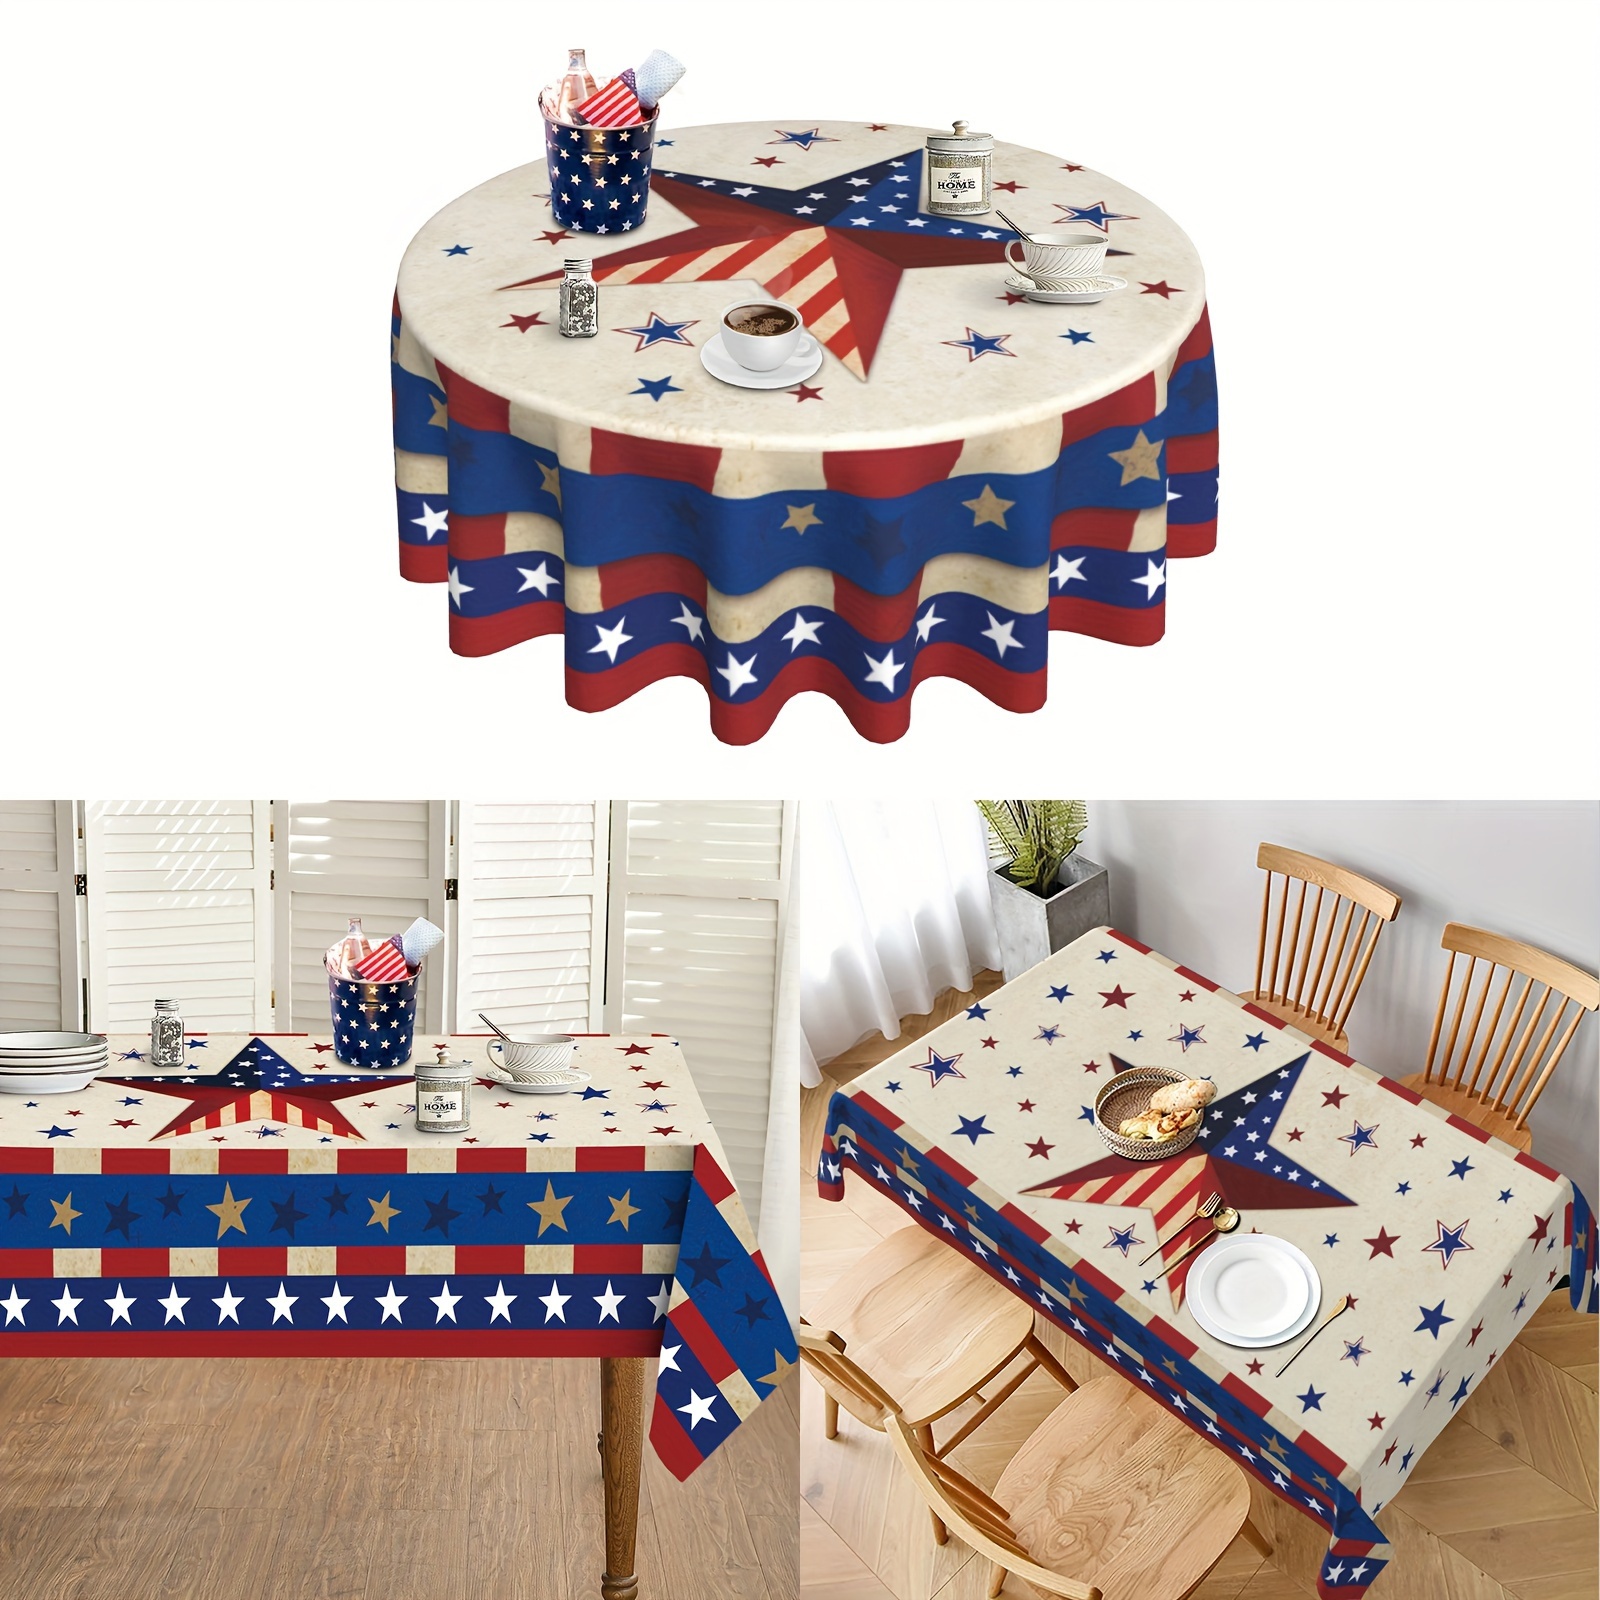 

1pc, Polyester Tablecloth, Farmhouse Vintage American Flag Patriotic Star Party Table Cloth, Patriotic Table Cover, Stain-resistant Wrinkle-resistant Tablecloth, American Independence Day Home Decor